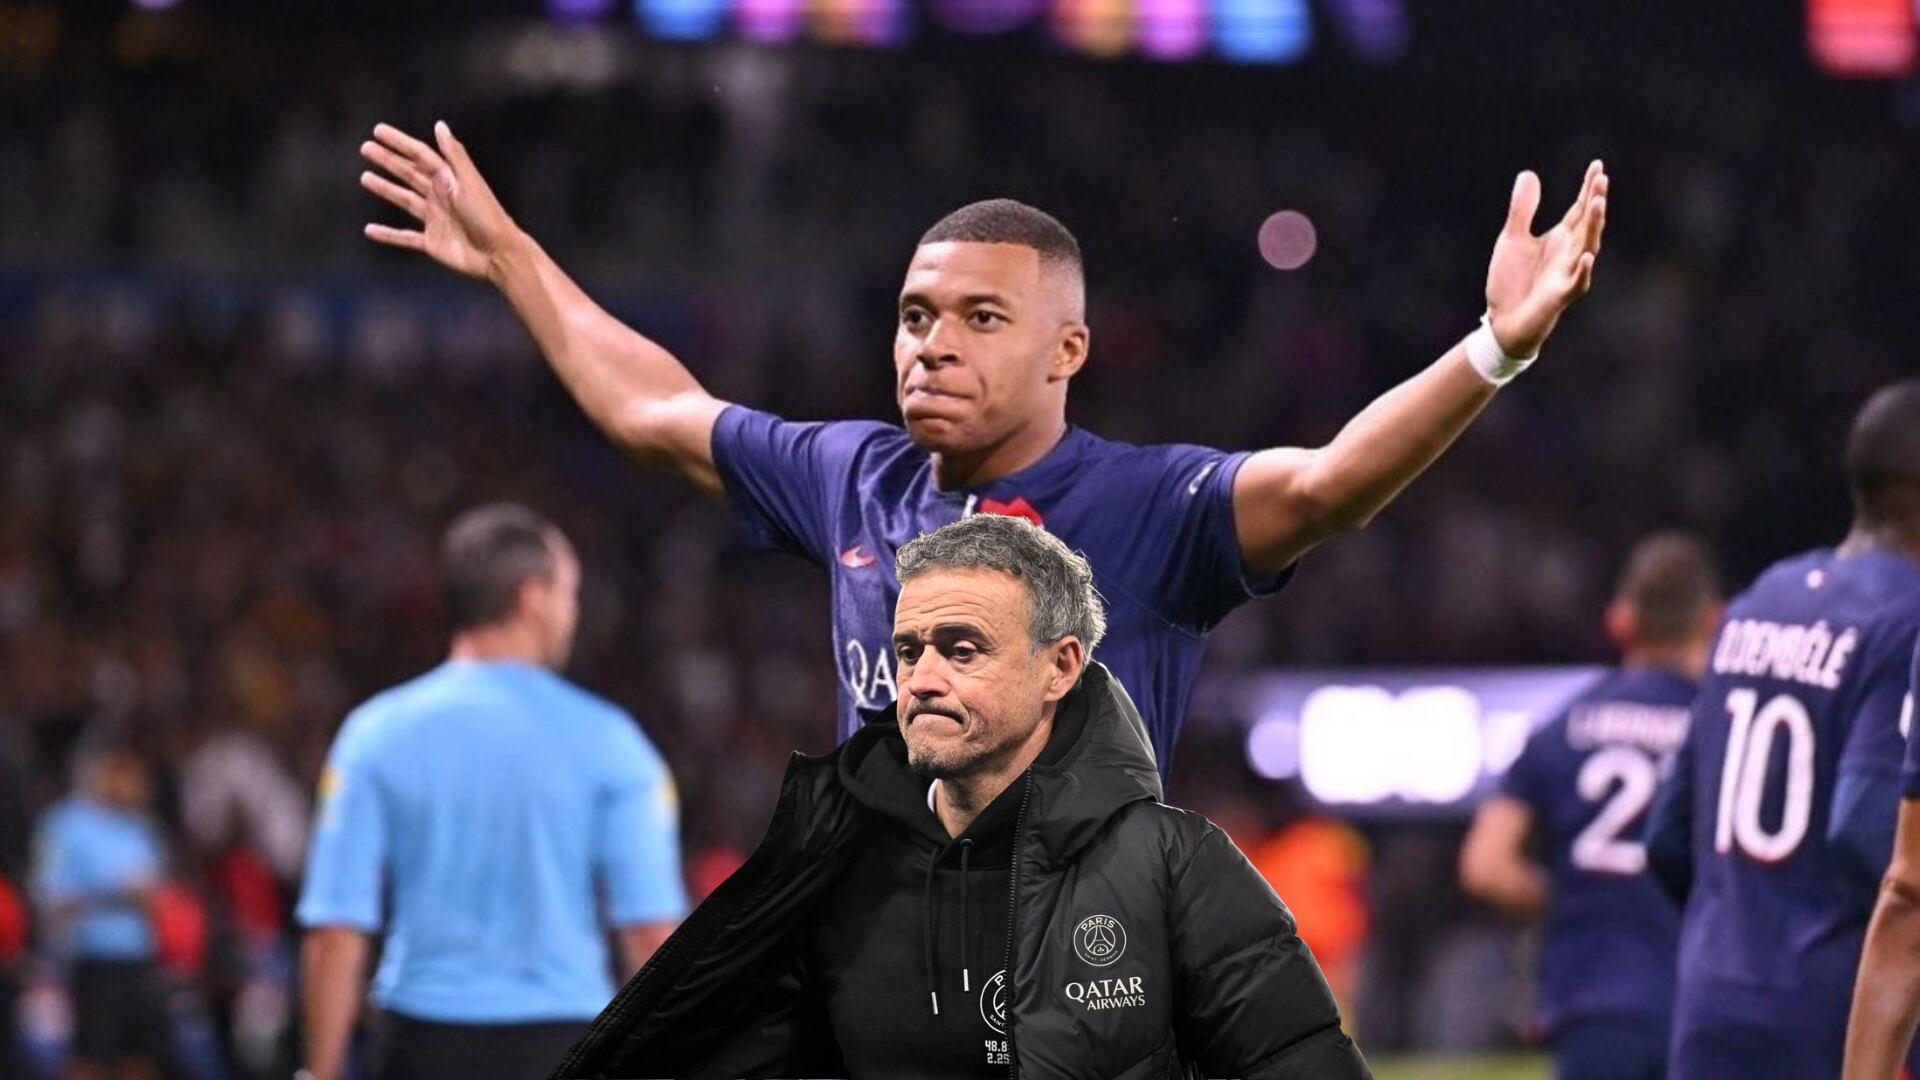 (VIDEO) The most curious answer about Mbappé's future, Luis Enrique was asked about Kylian to Real Madrid & he said this